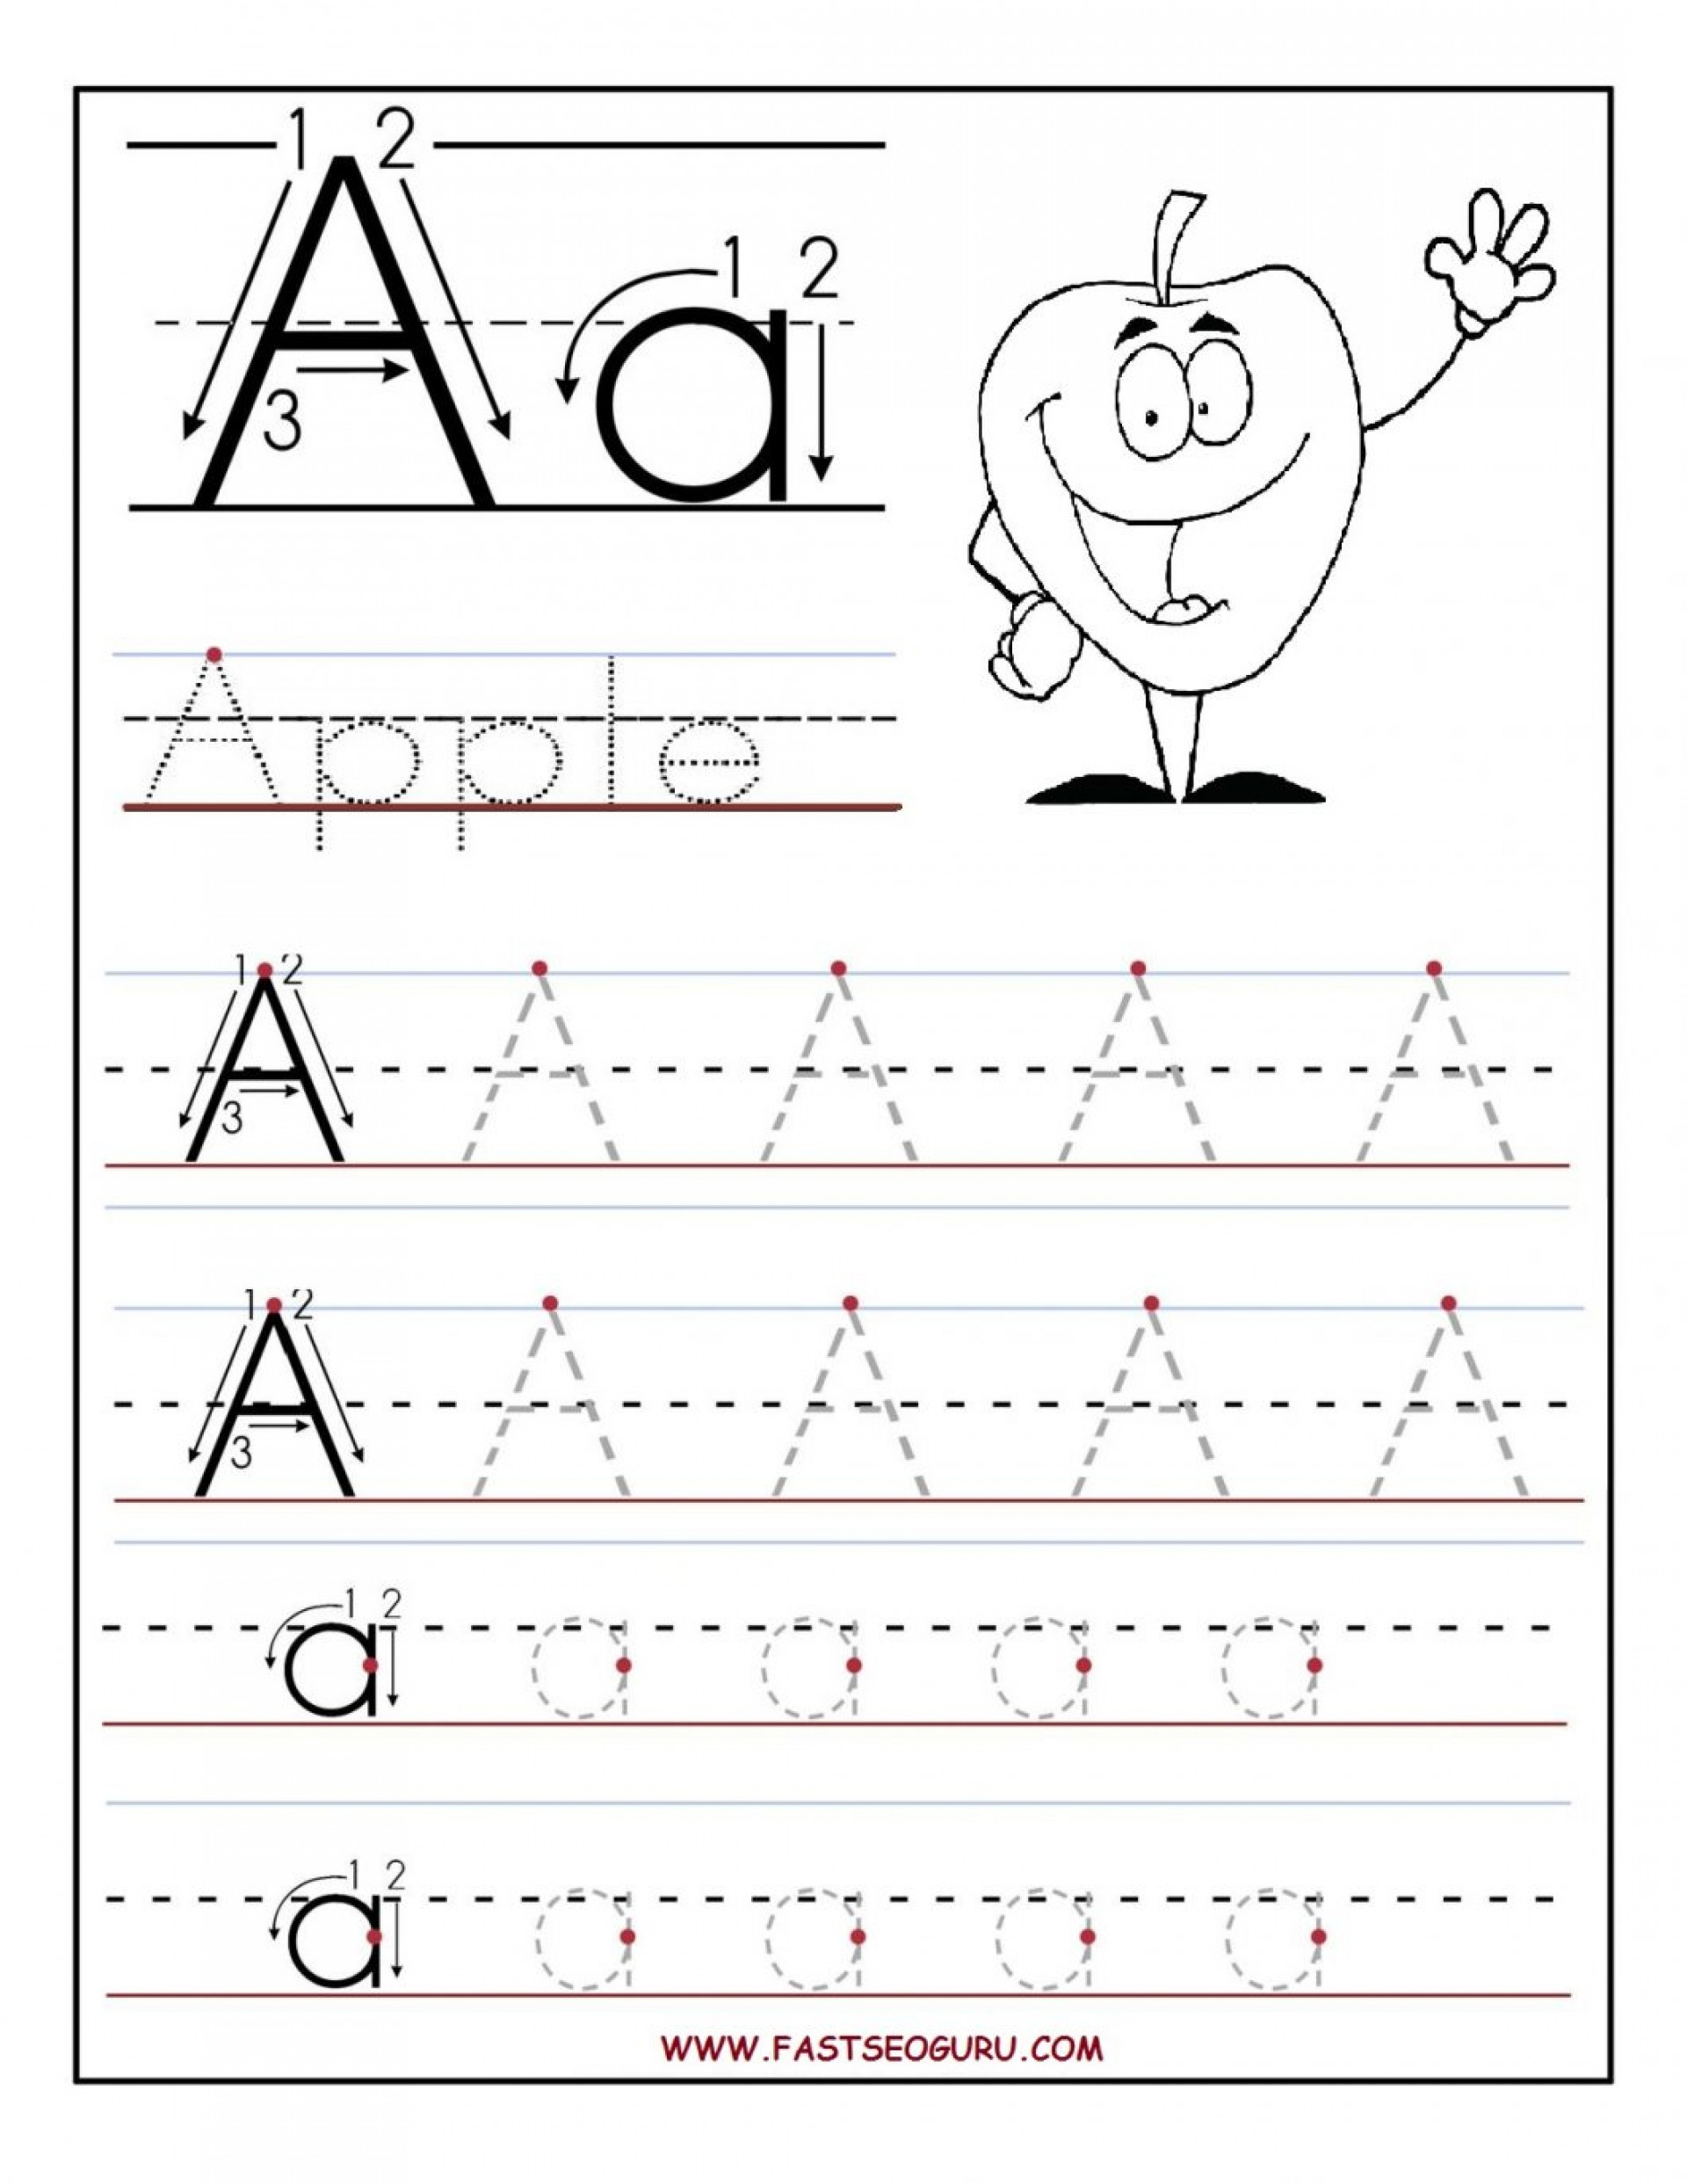 Coloring Book : Free Printable Tracingts For Kindergarten intended for Printable Tracing Letters For Kindergarten